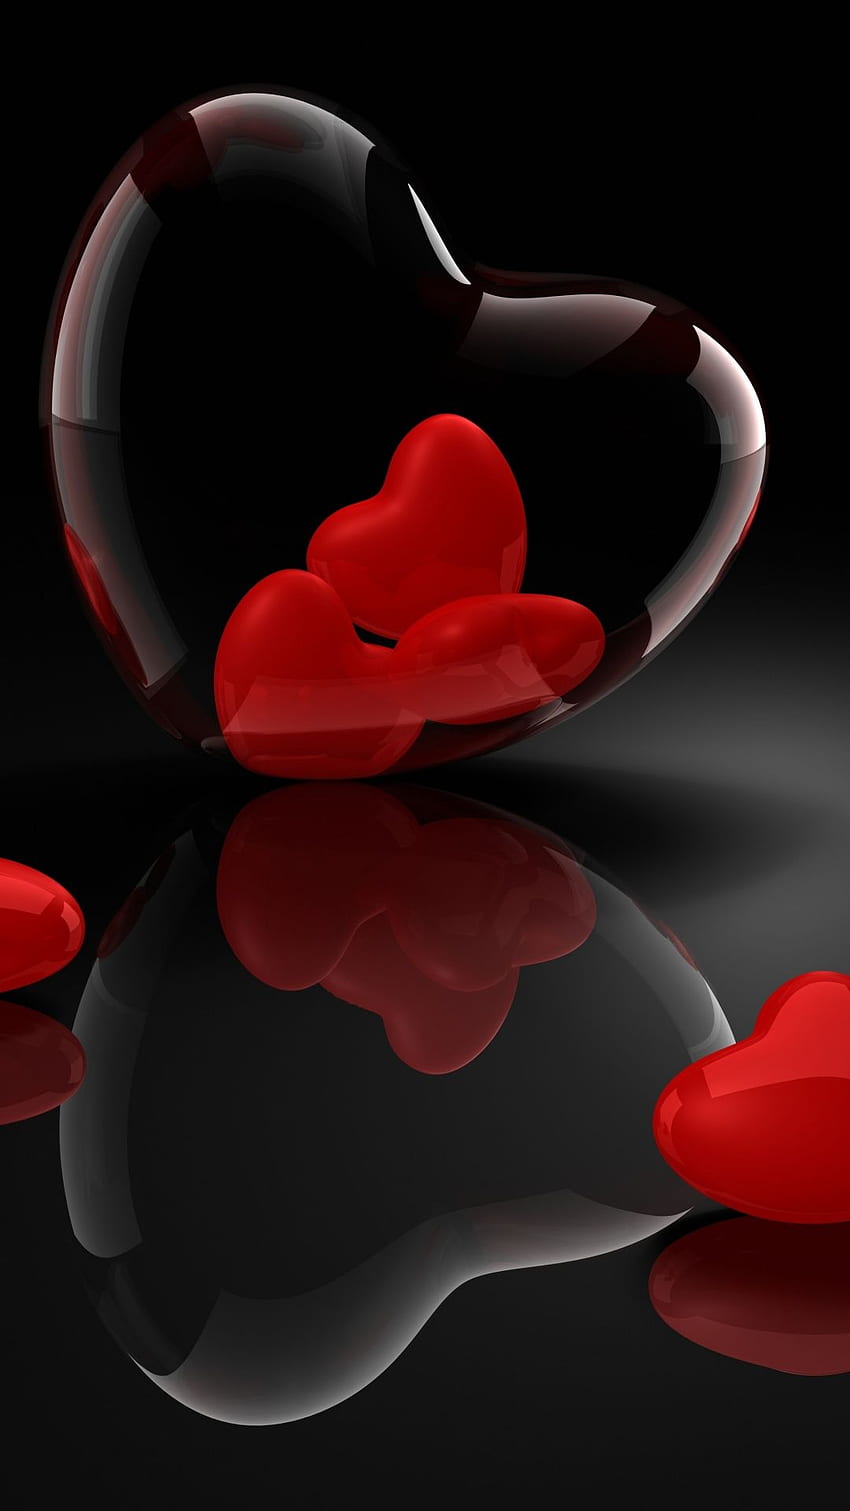 Heart Glass 3D Reflection iPhone 6 - Black And Red Hearts - -, Vertical Love HD phone wallpaper